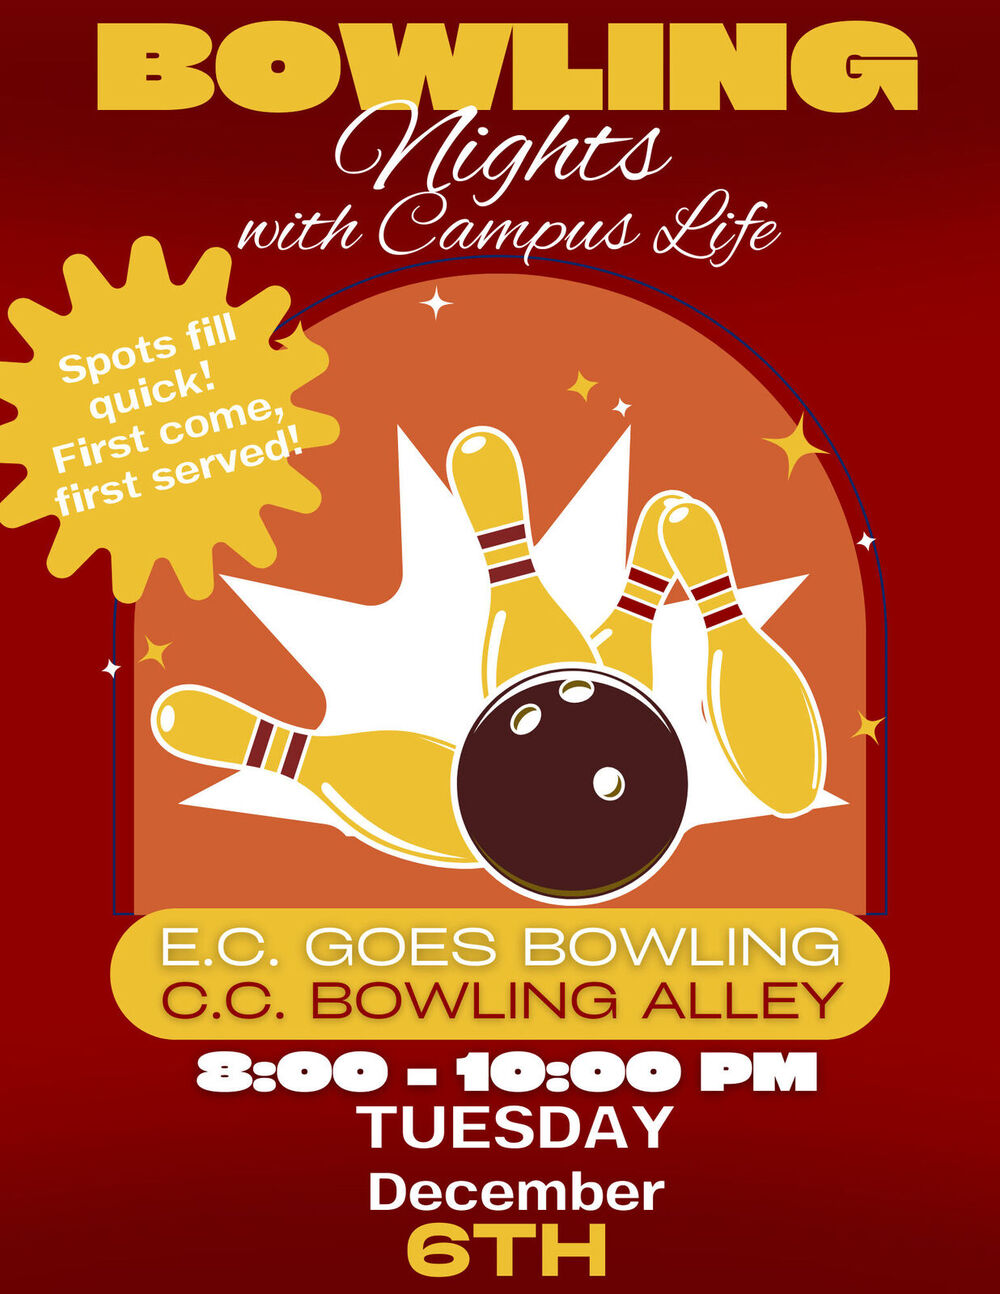 bowling-nights-with-campus-life